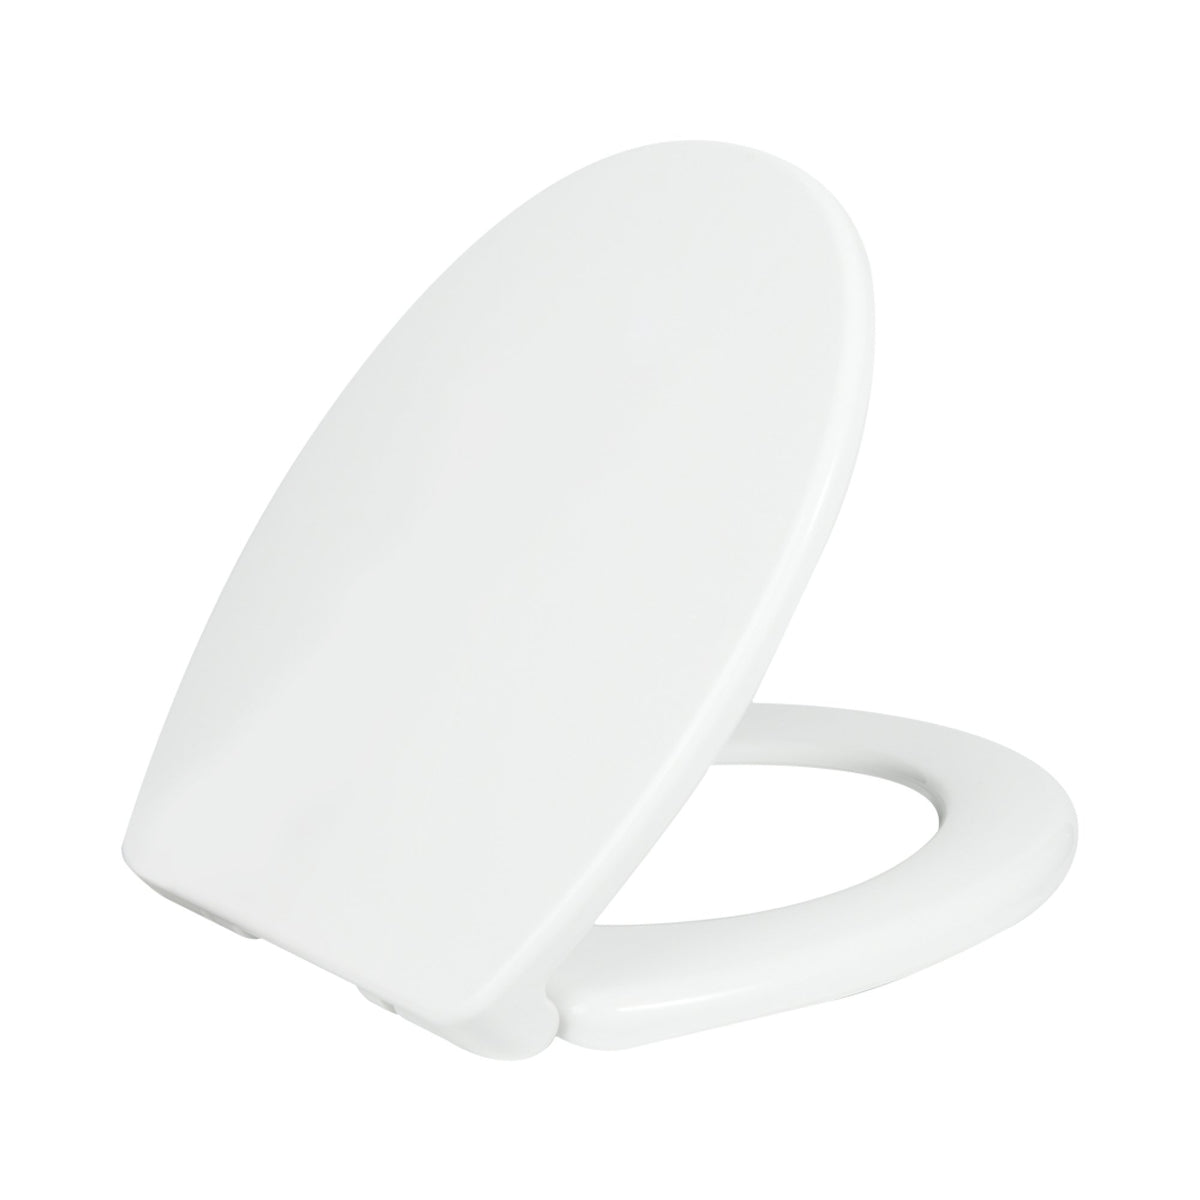 Heated Toilet Seat Cover Bathroom D Shape Soft Close Easy Install